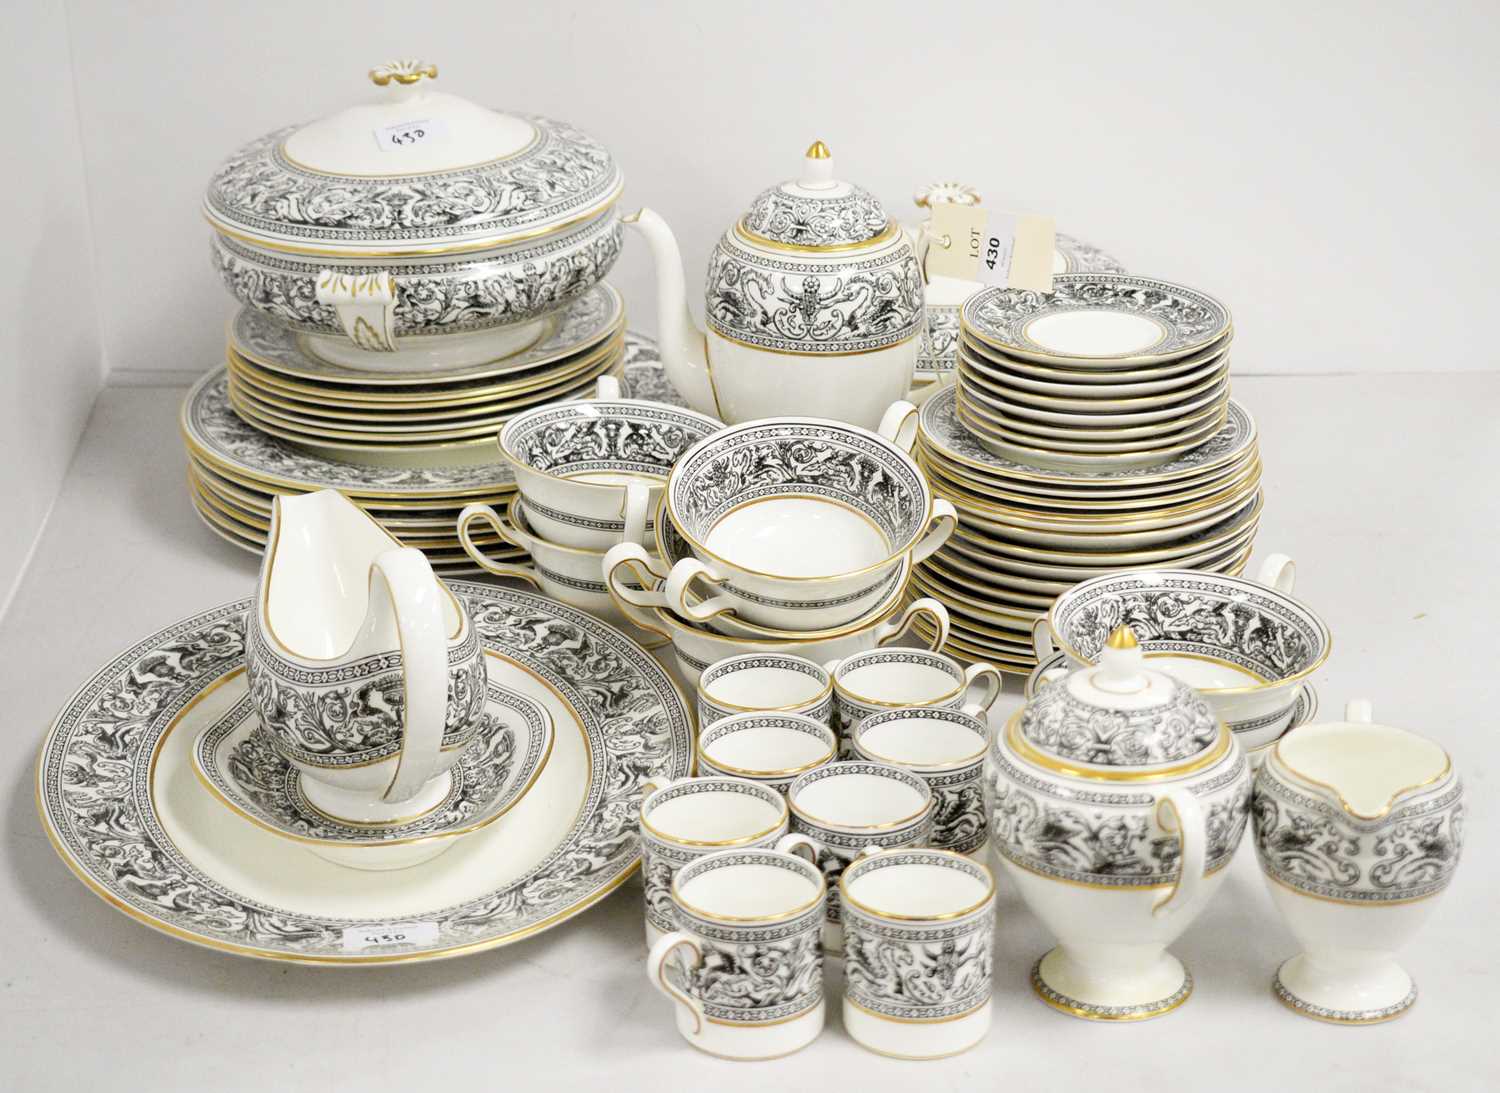 Lot 430 - A Wedgwood 'Florentine' pattern part coffee and dinner service